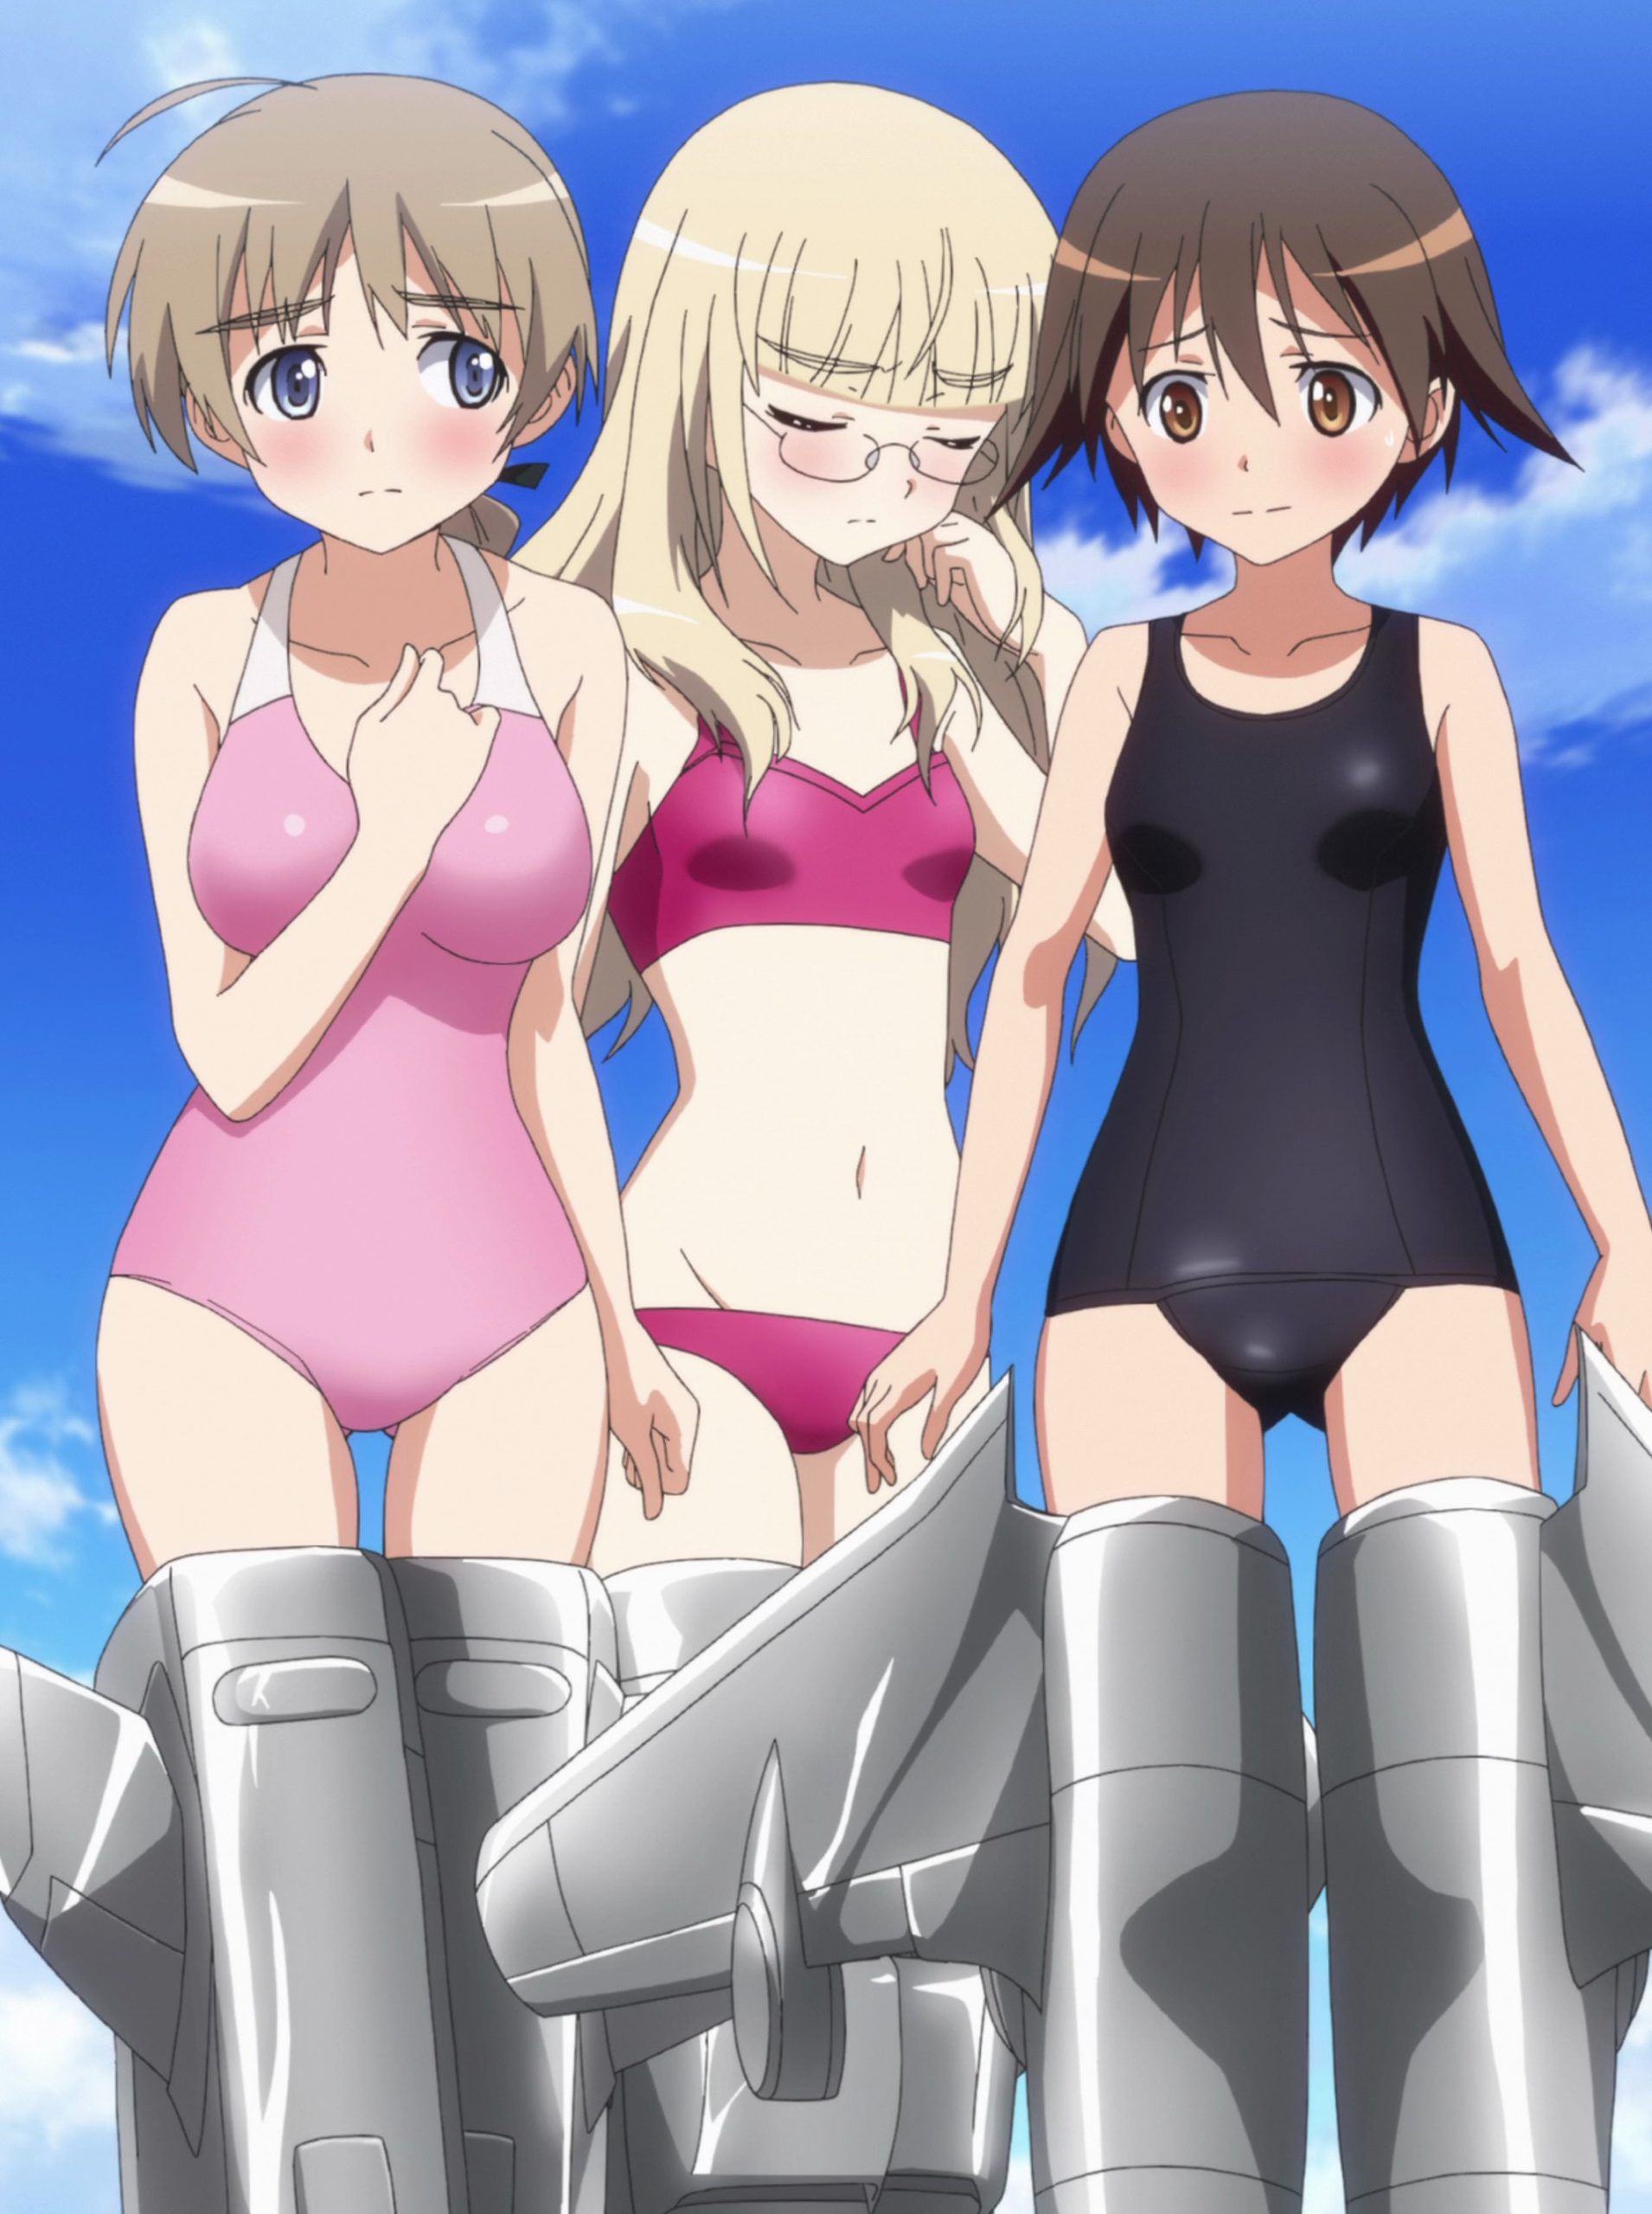 [Strike Witches] [Brave Witches] stripped Kora or erotic image Part 6 27